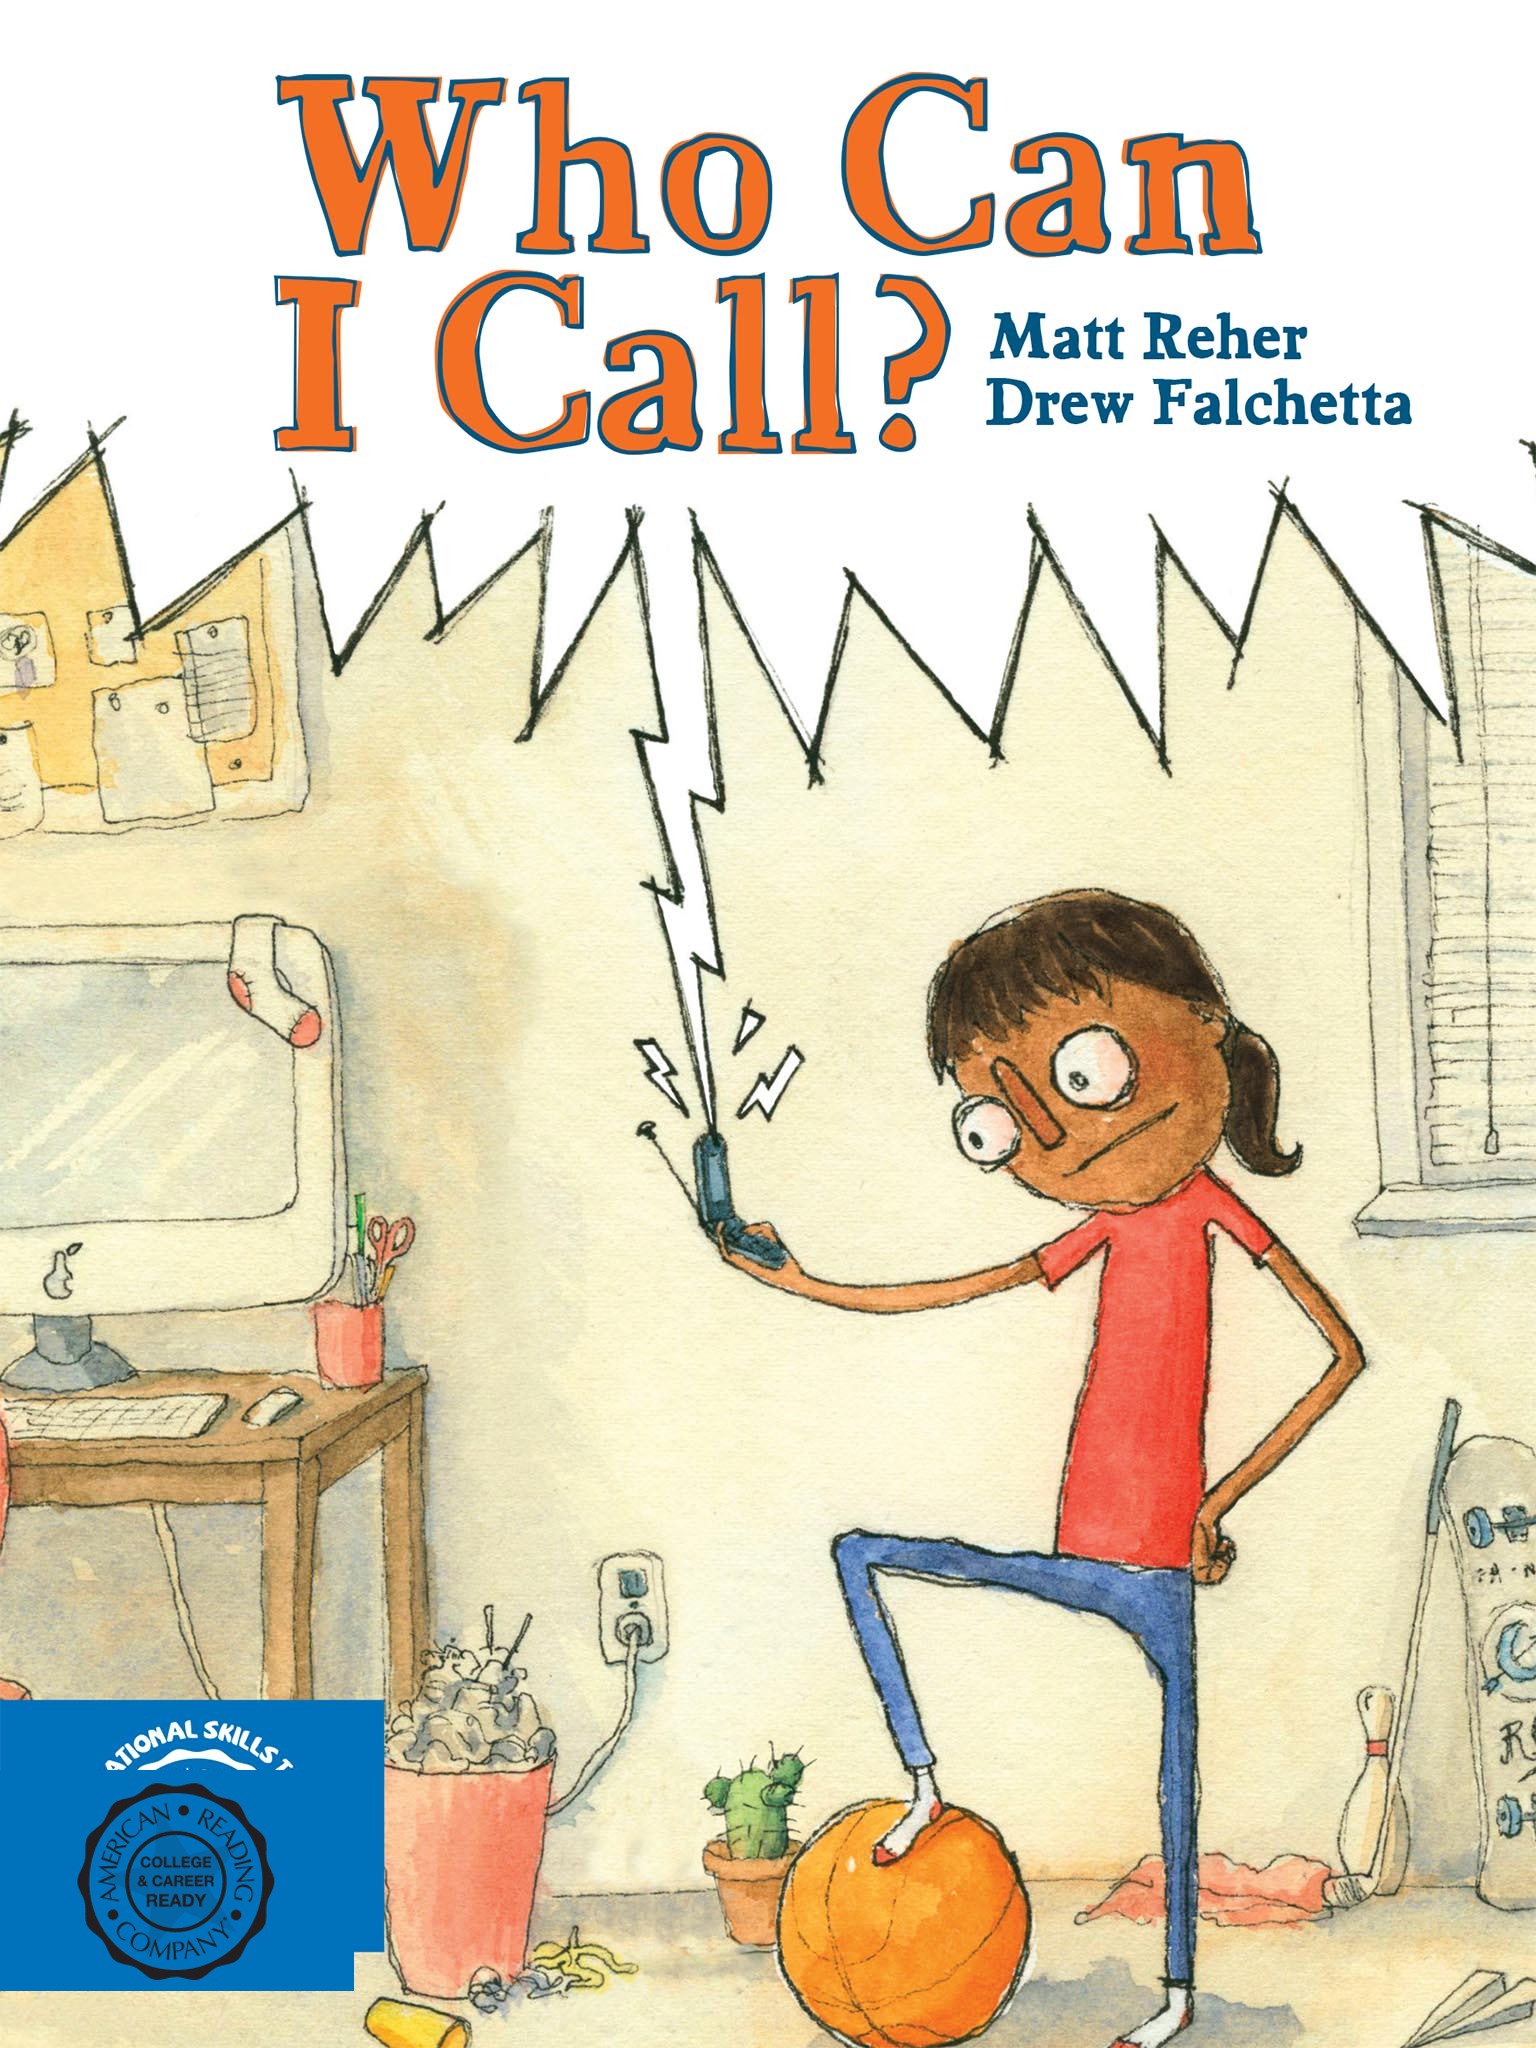 Who Can I Call? by Matt Reher (9781634376525)